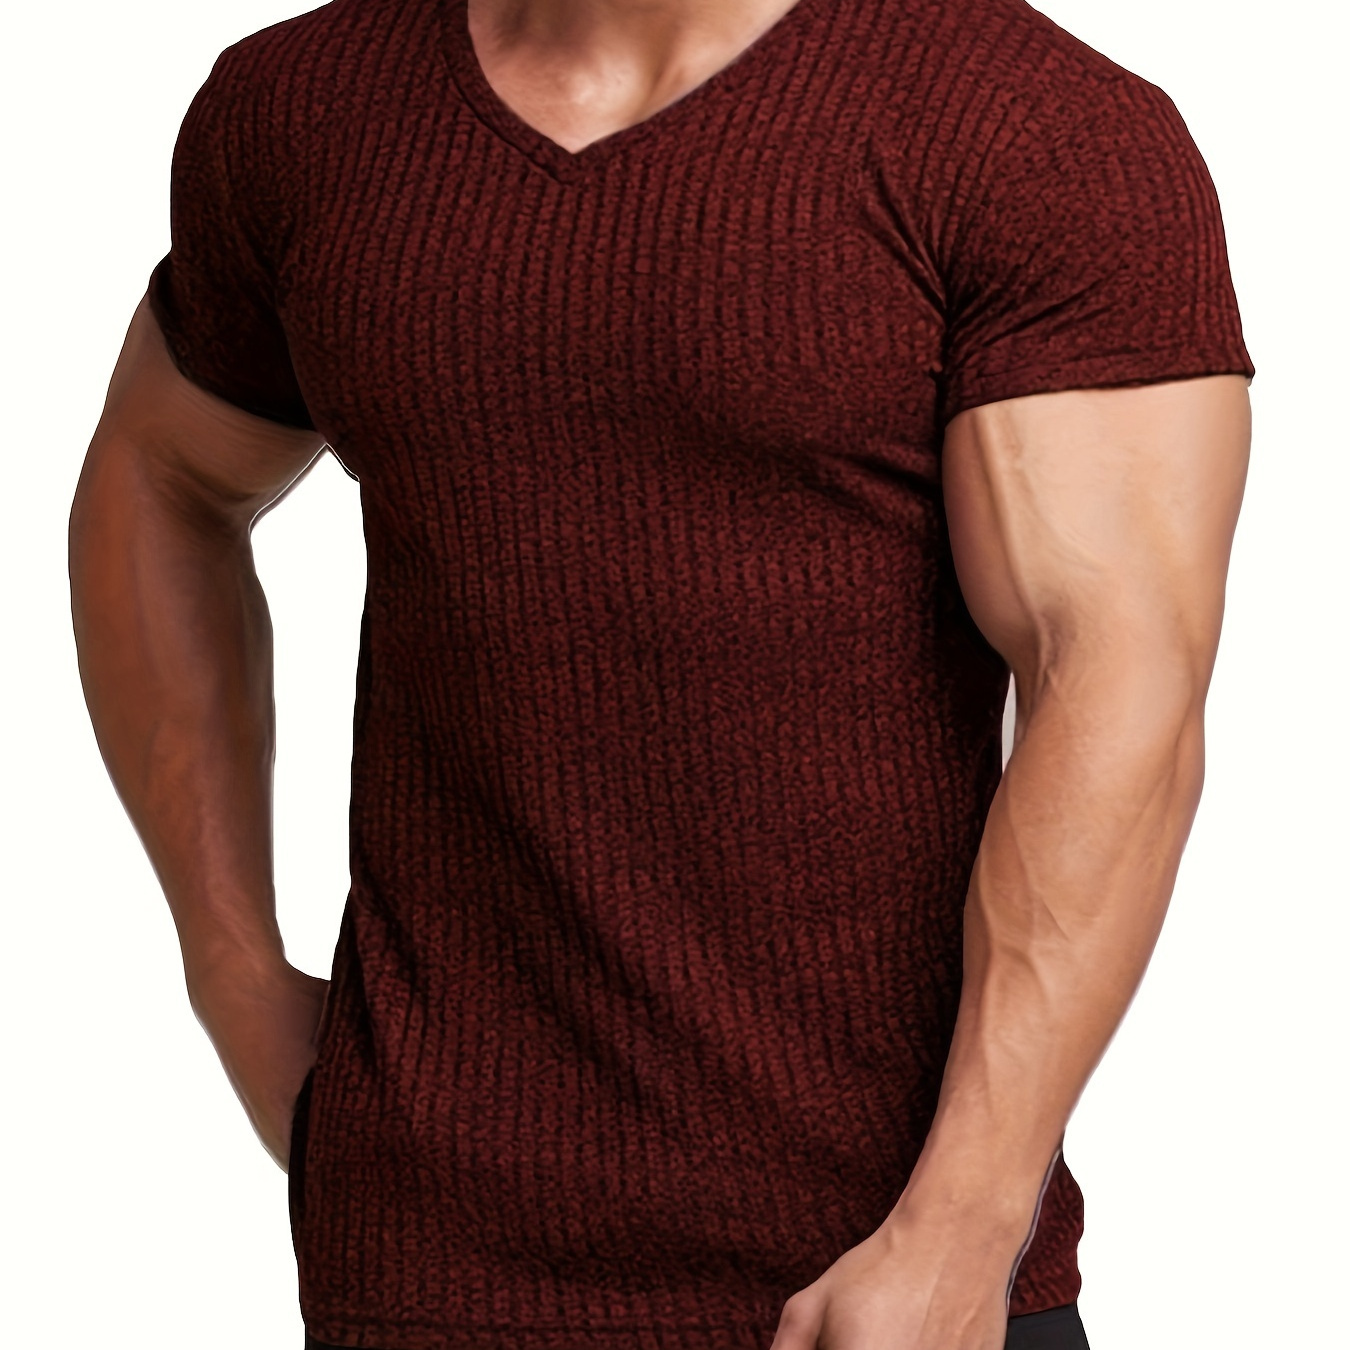 

Solid Causal V-neck Short Sleeve Ribbed T-shirt For Men, Casual Summer T-shirt For Daily Wear And Vacation Resorts